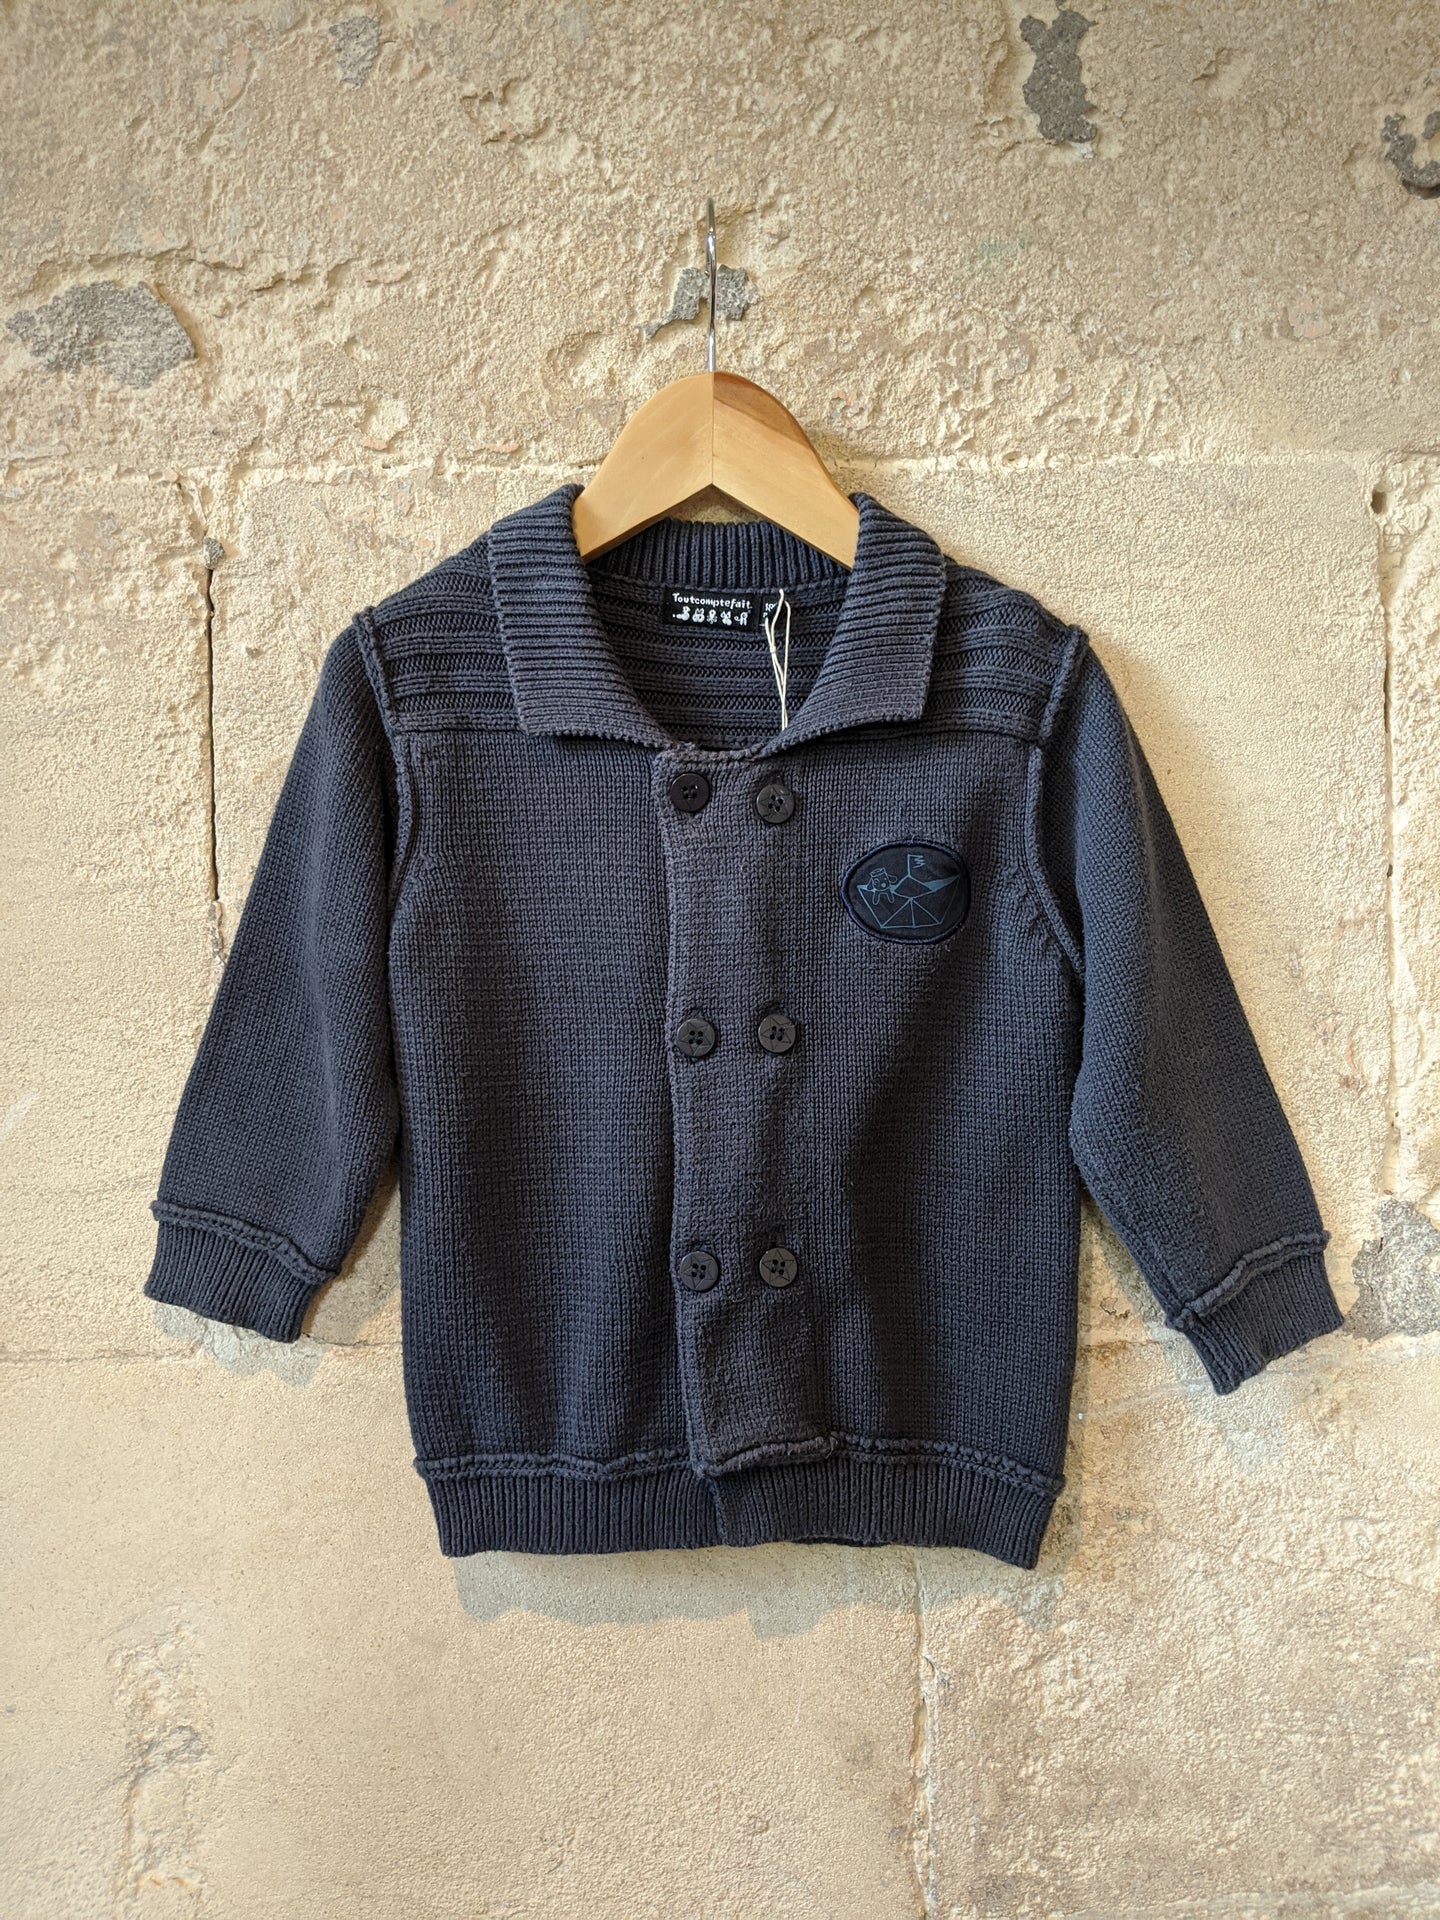 Chunky Knit French Navy Cardigan - 18 Months